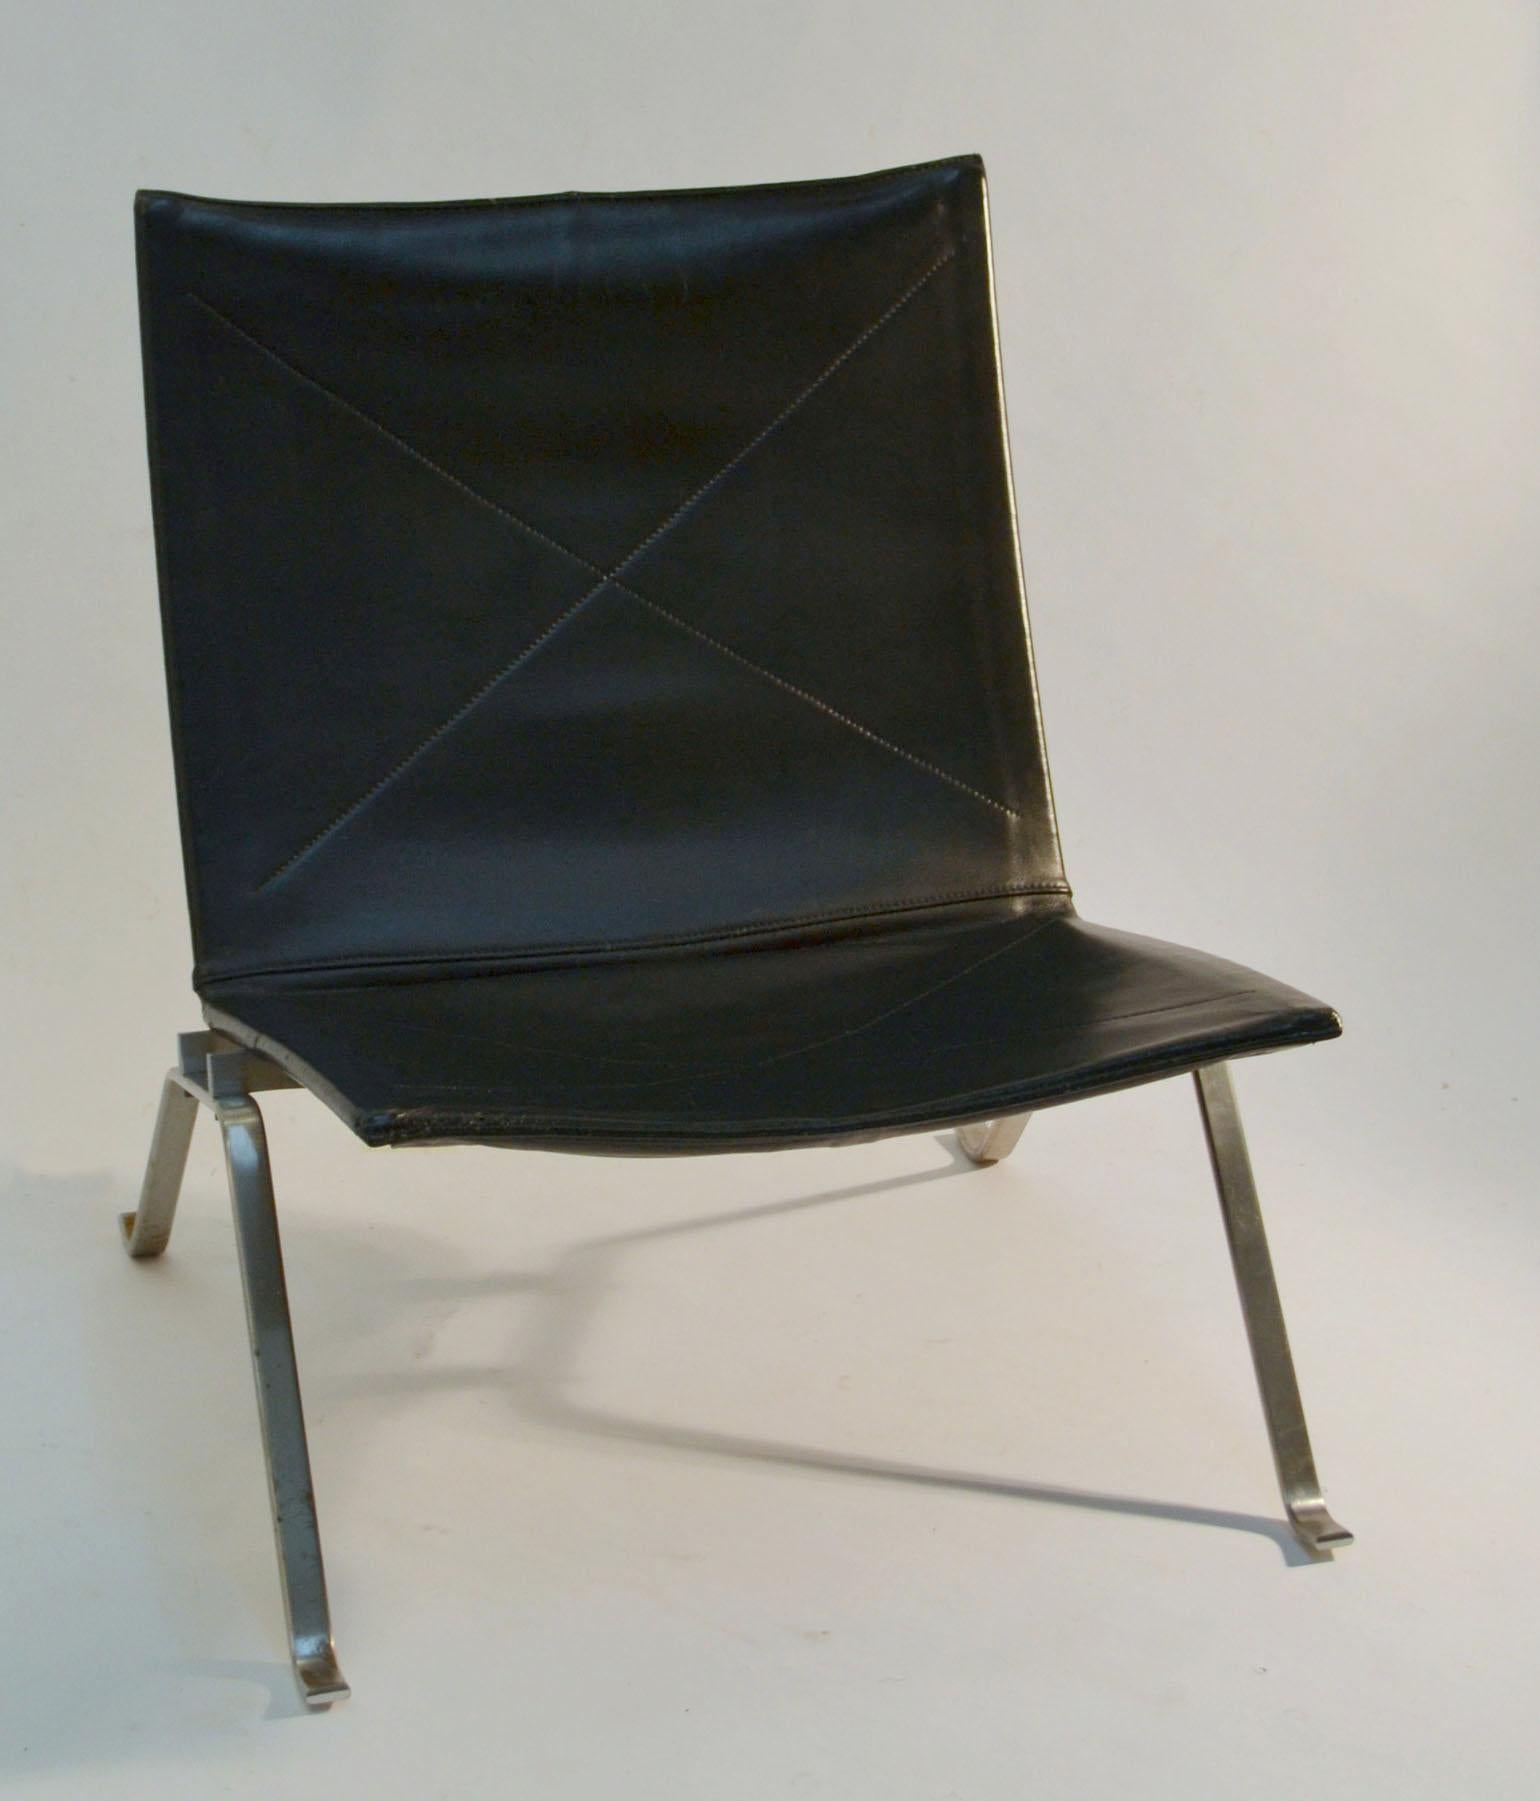 The iconic pair of PK-22 black leather and steel frame structure of the lounge chairs designed by Poul Kjaerholm 1957 in Copenhagen, under license by Fritz Hansen, 1990s. This model PK-22 is probably Kjærholms most famous design. The chair embodies